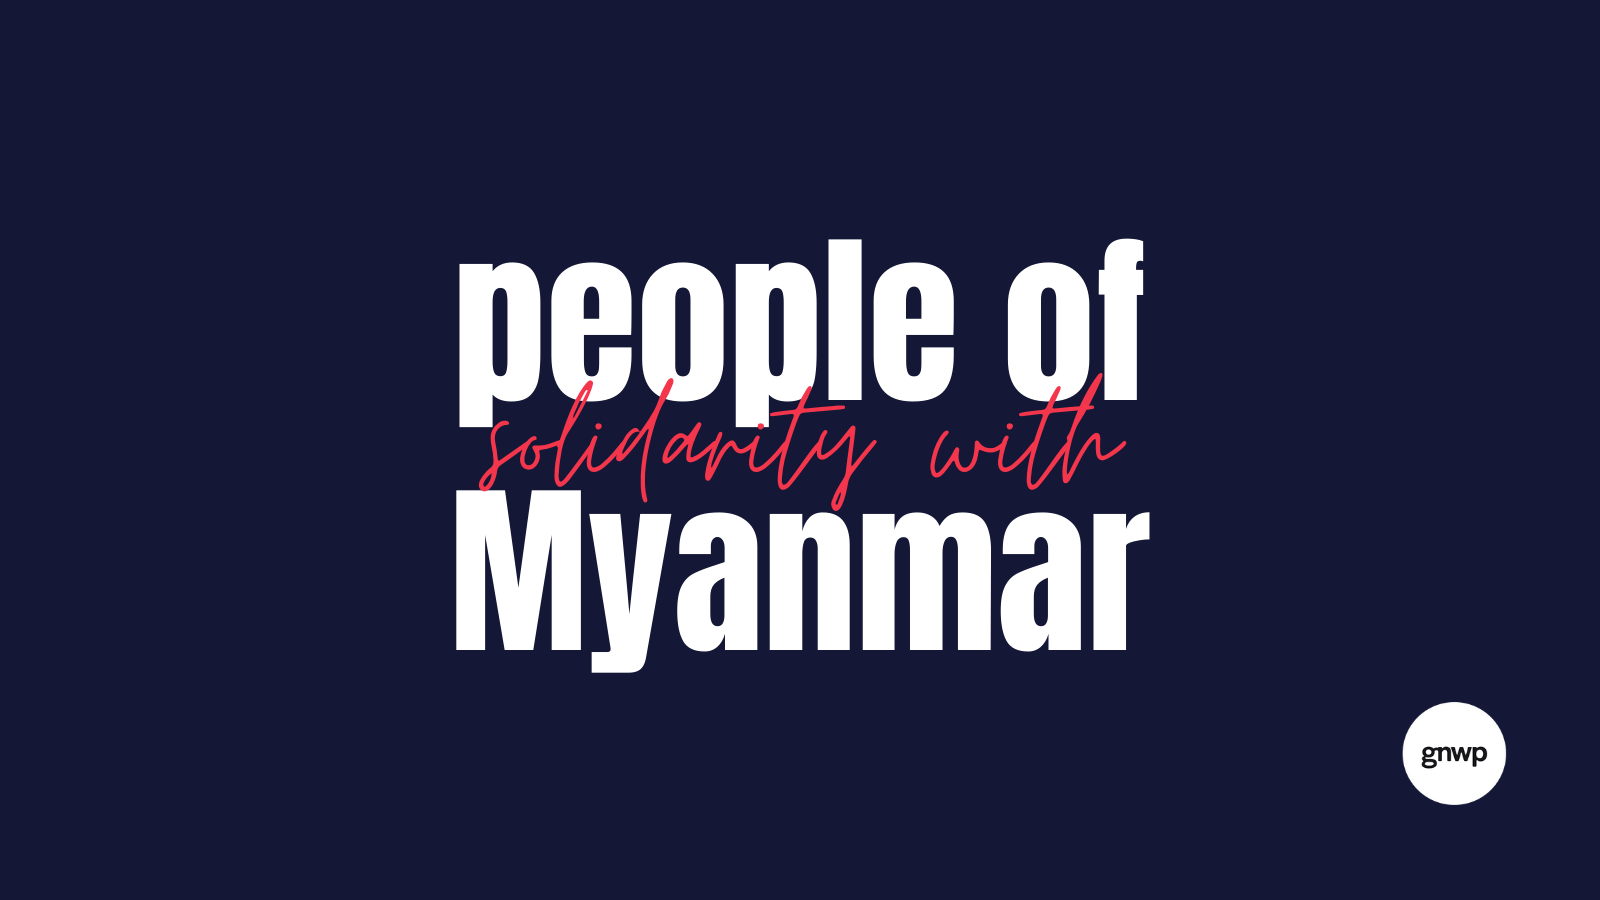 Solidarity With The Persons Of Myanmar!